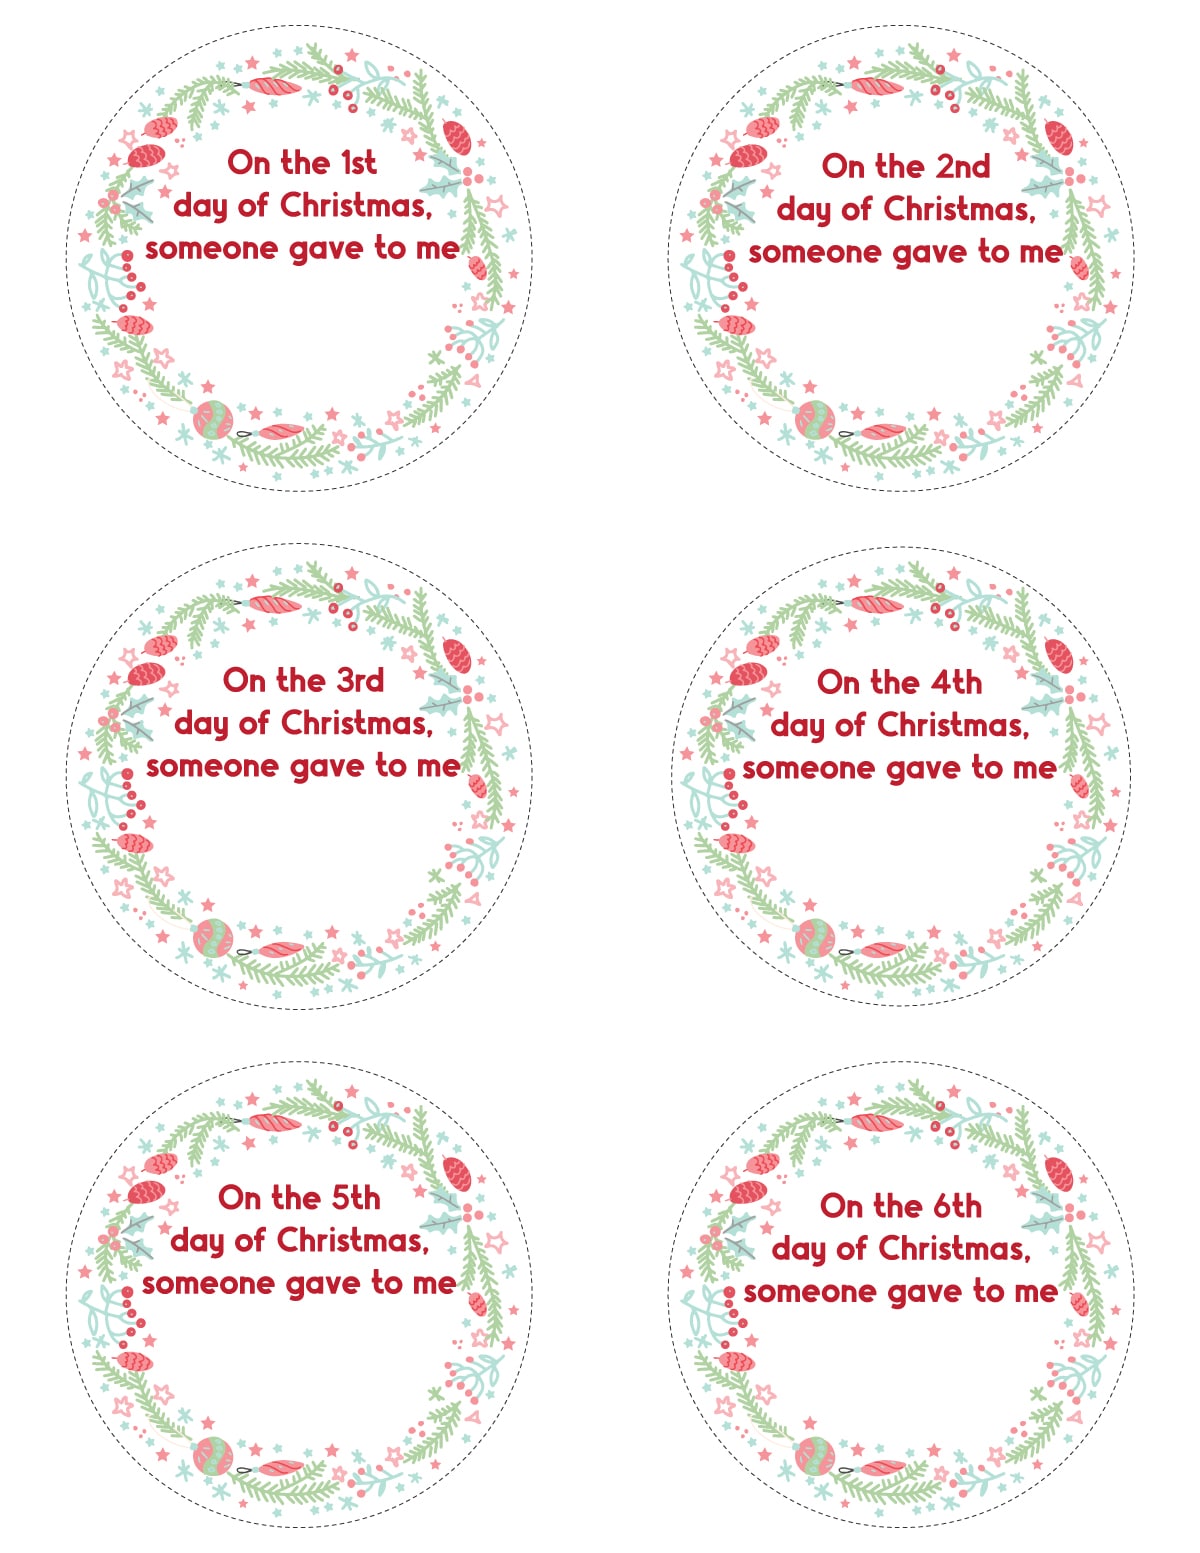 Creative 12 Days Of Christmas Gifts FREE Gift Tags Play Party Plan